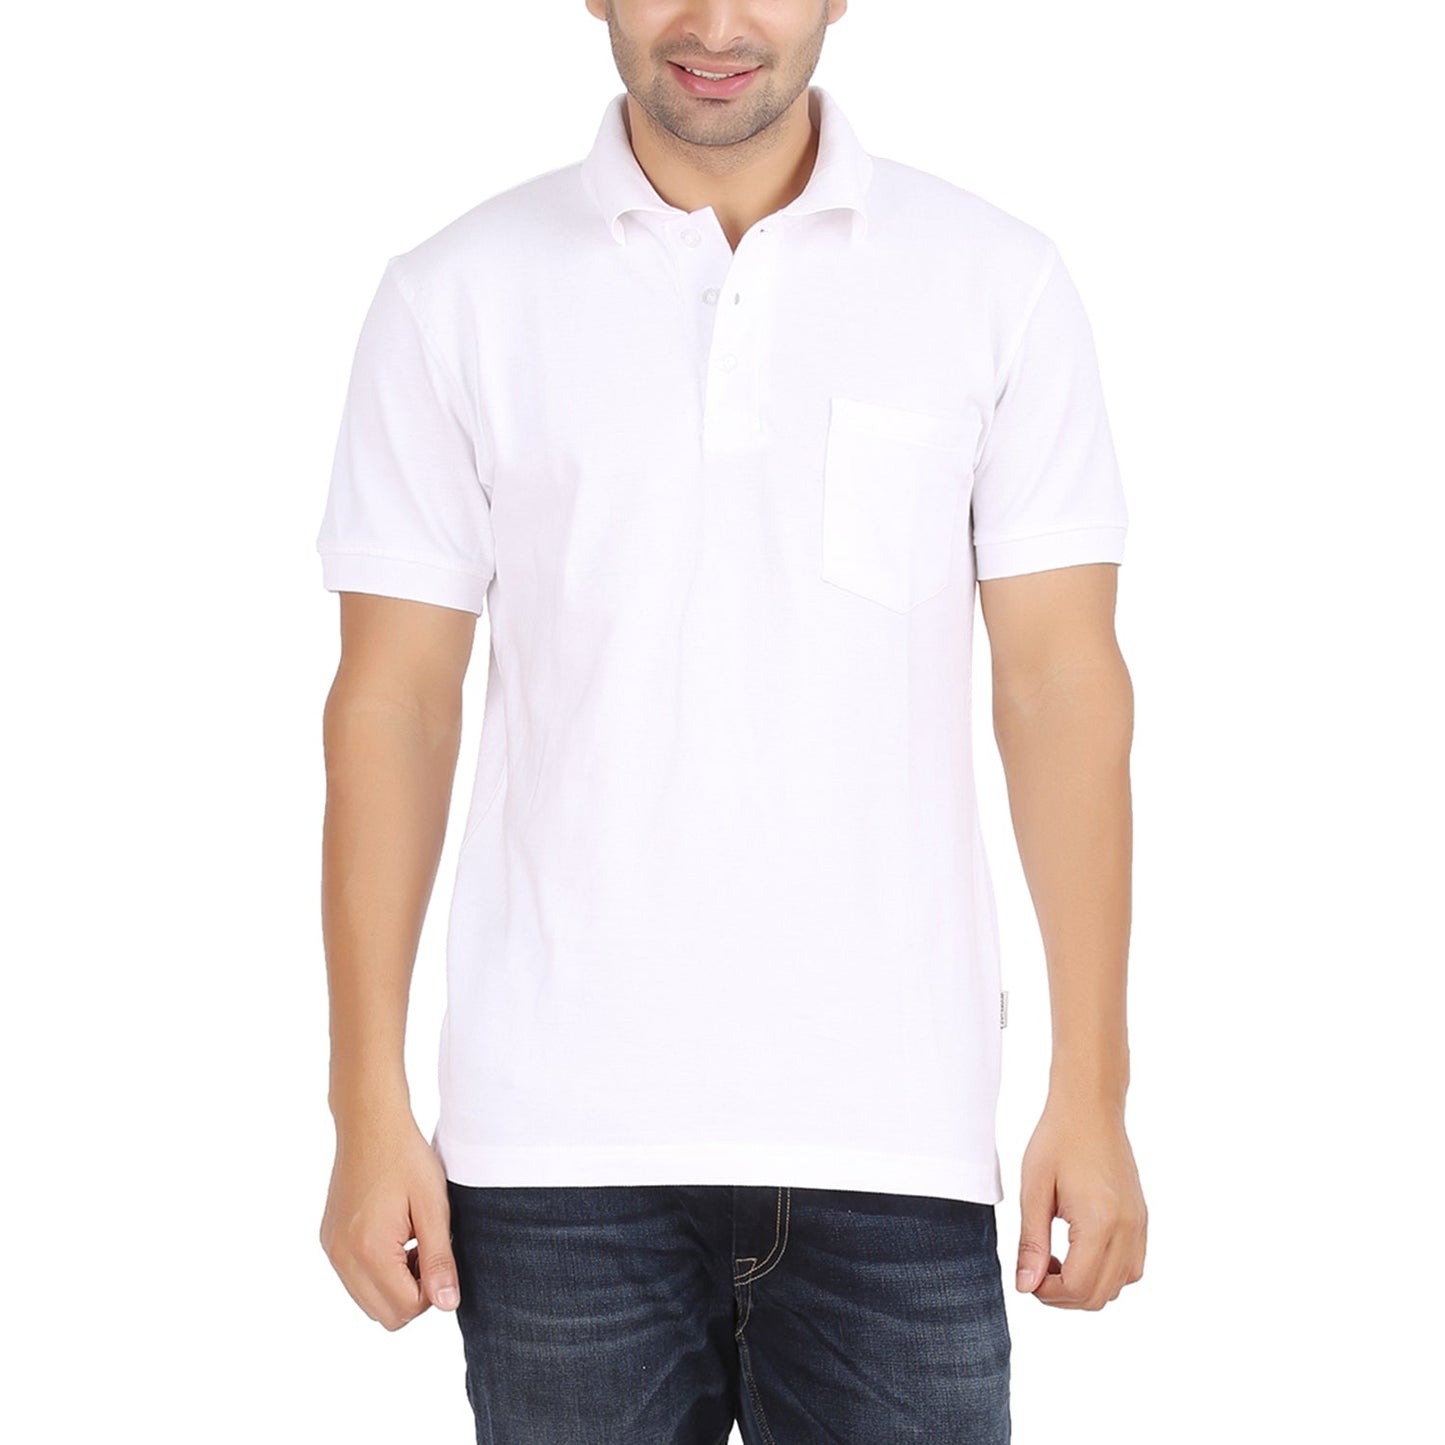 White Polo Tshirt With Pocket-Style #0705